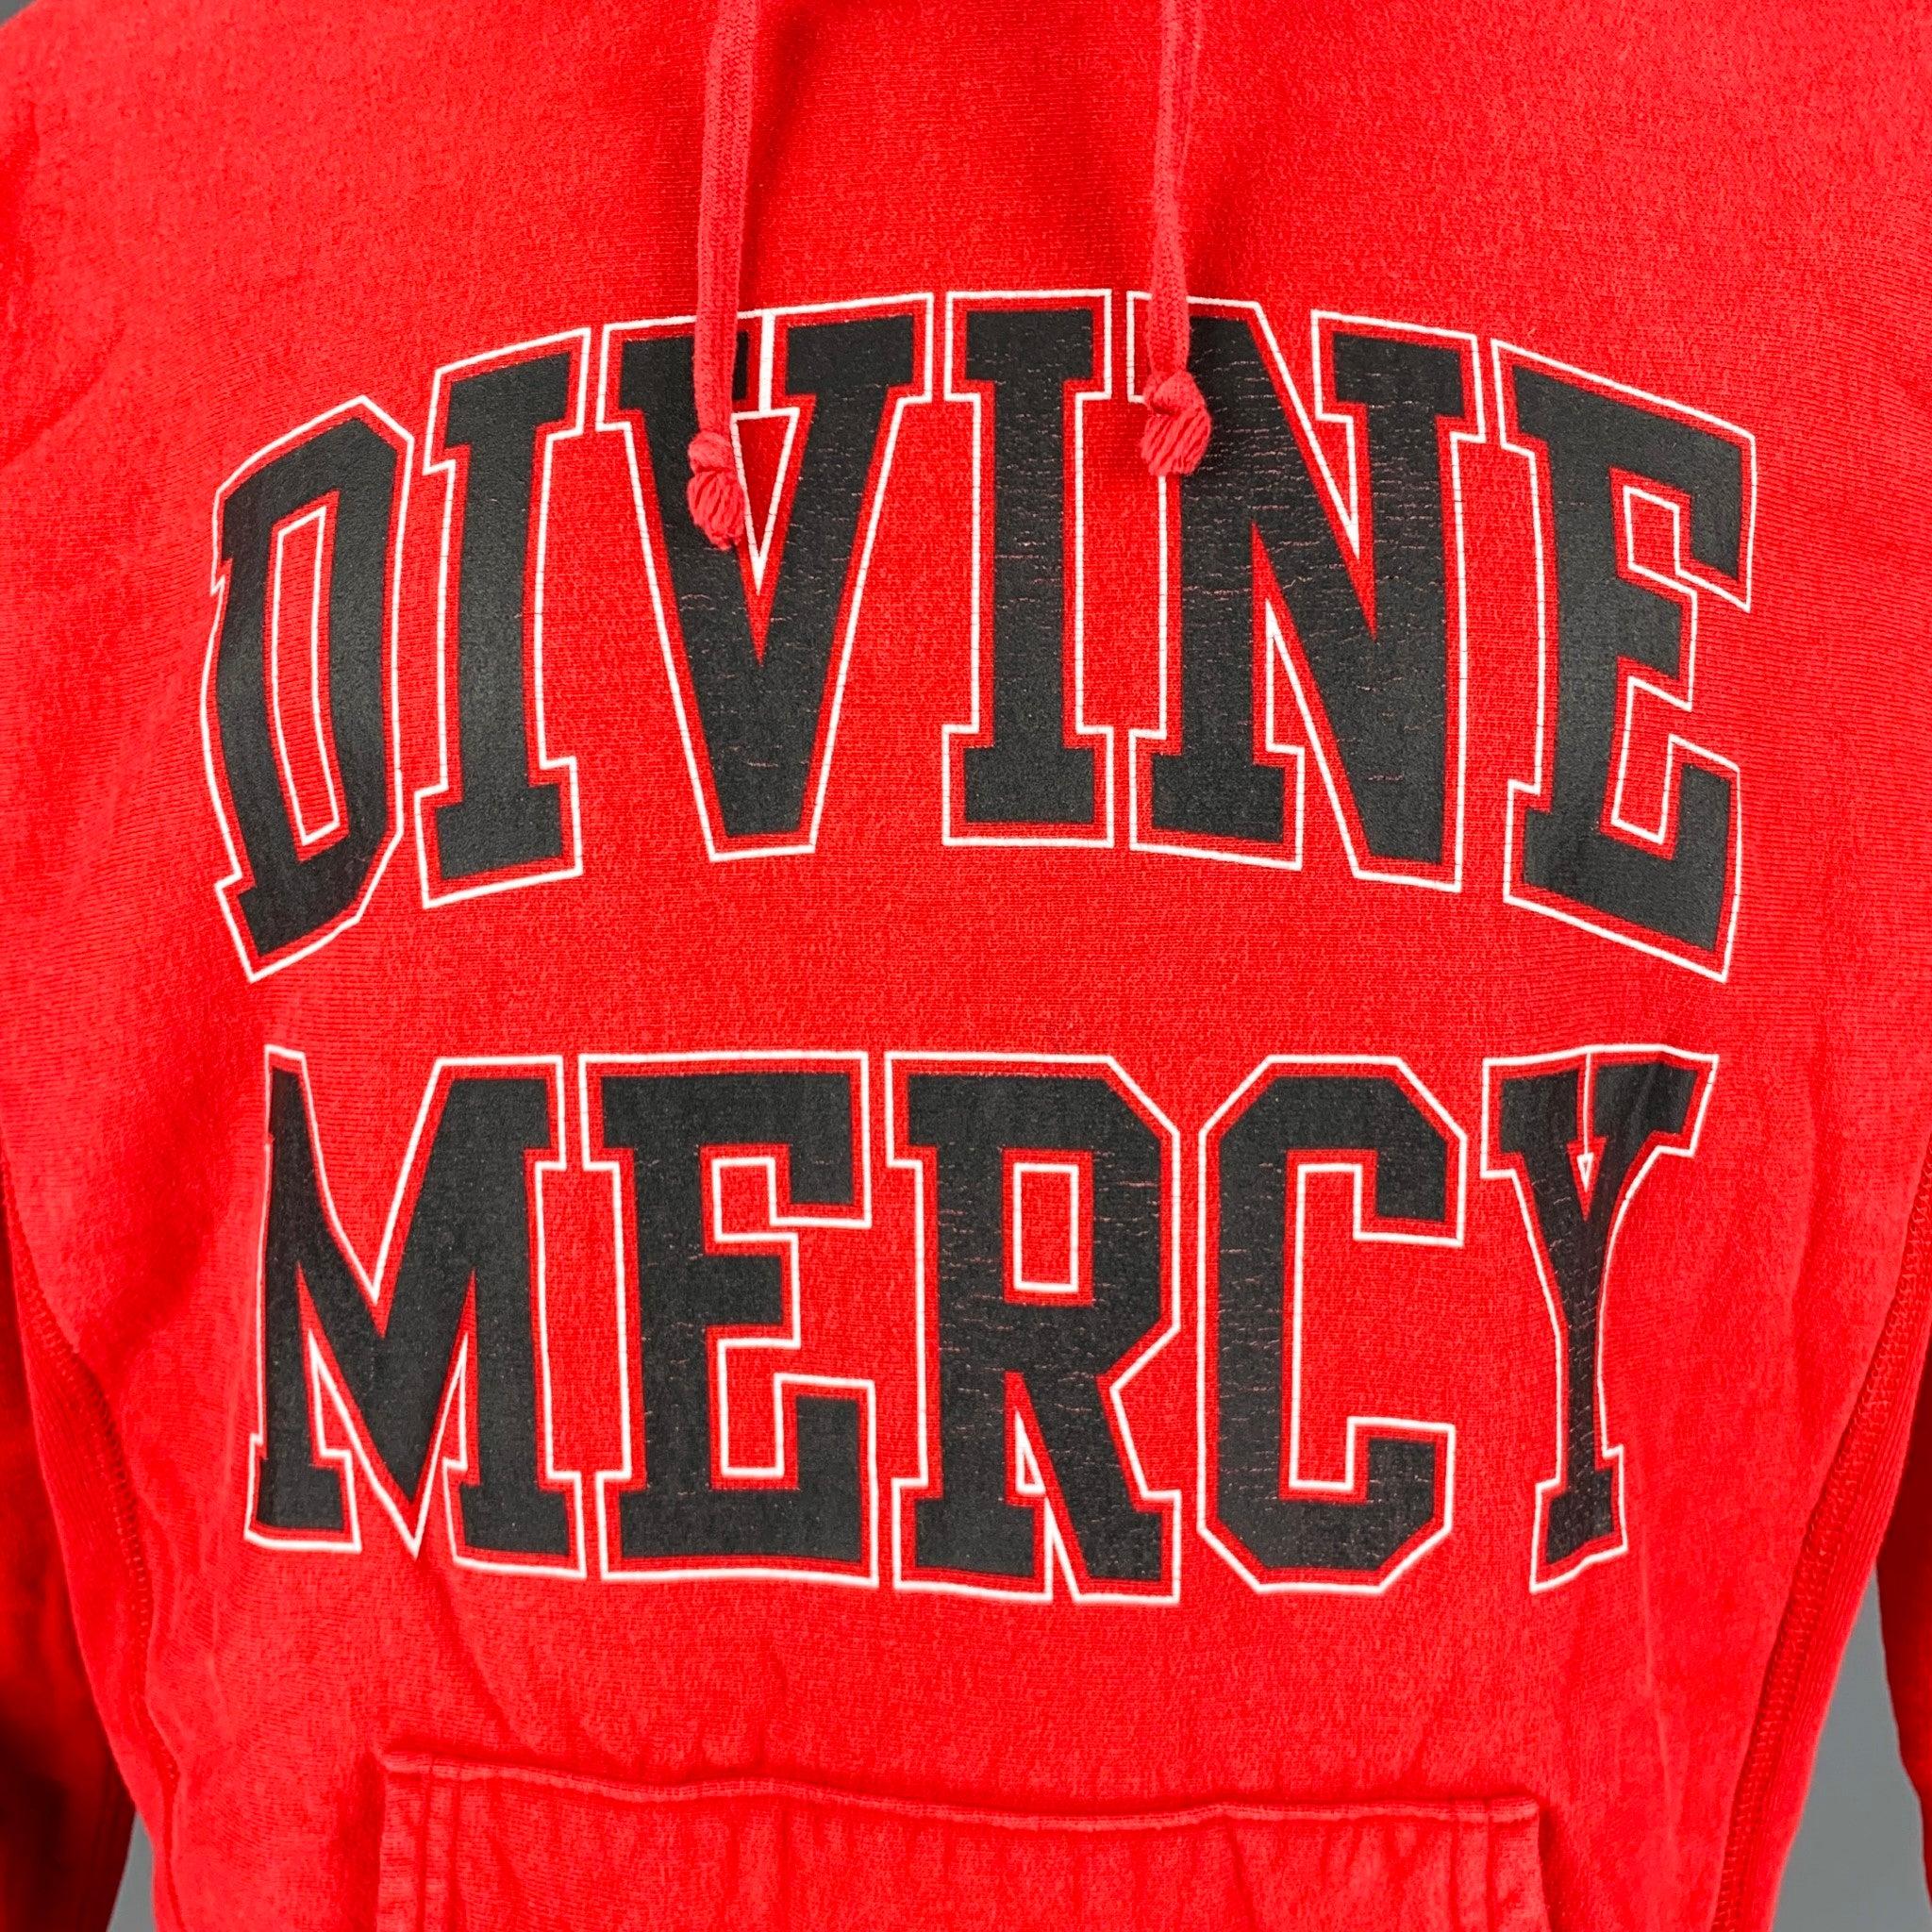 SUPREME sweatshirt
in a red cotton knit featuring a hooded style, text which reads 